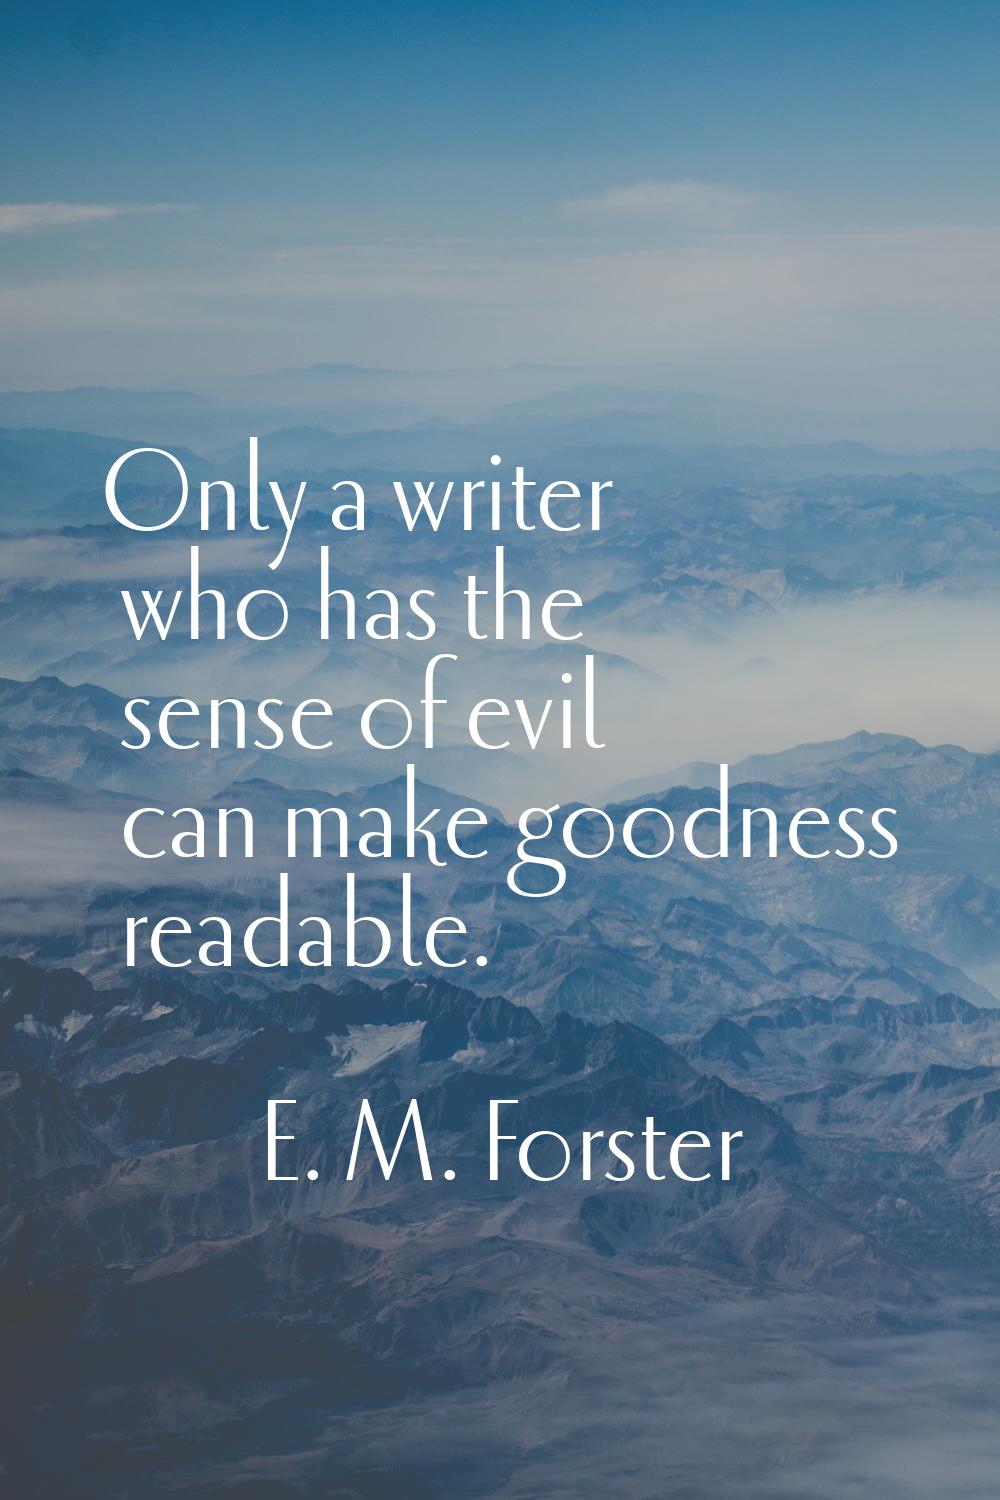 Only a writer who has the sense of evil can make goodness readable.